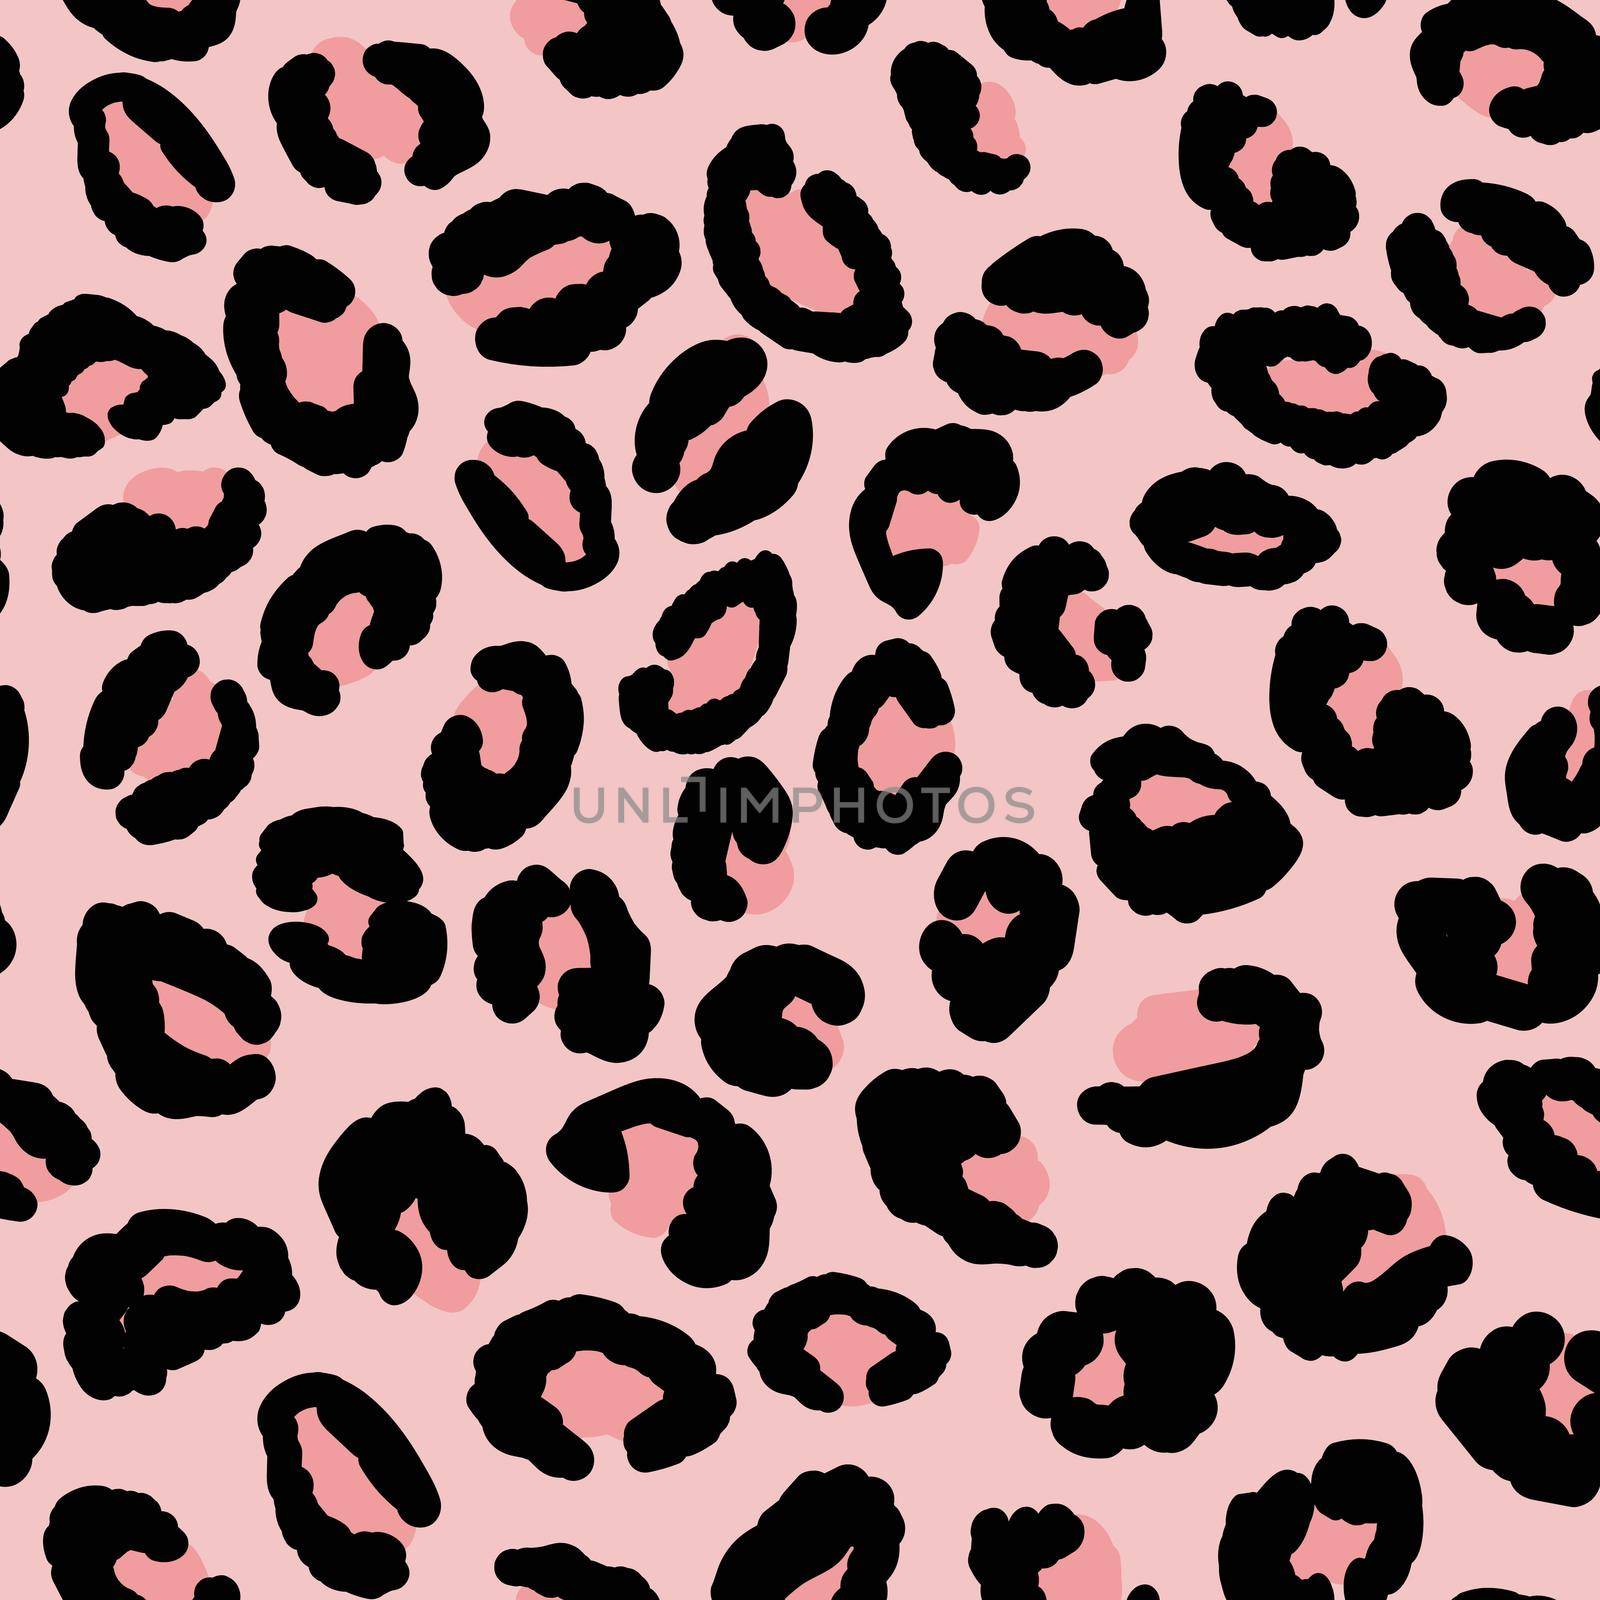 Abstract modern leopard seamless pattern. Animals trendy background. Black and pink decorative vector illustration for print, card, postcard, fabric, textile. Modern ornament of stylized skin.